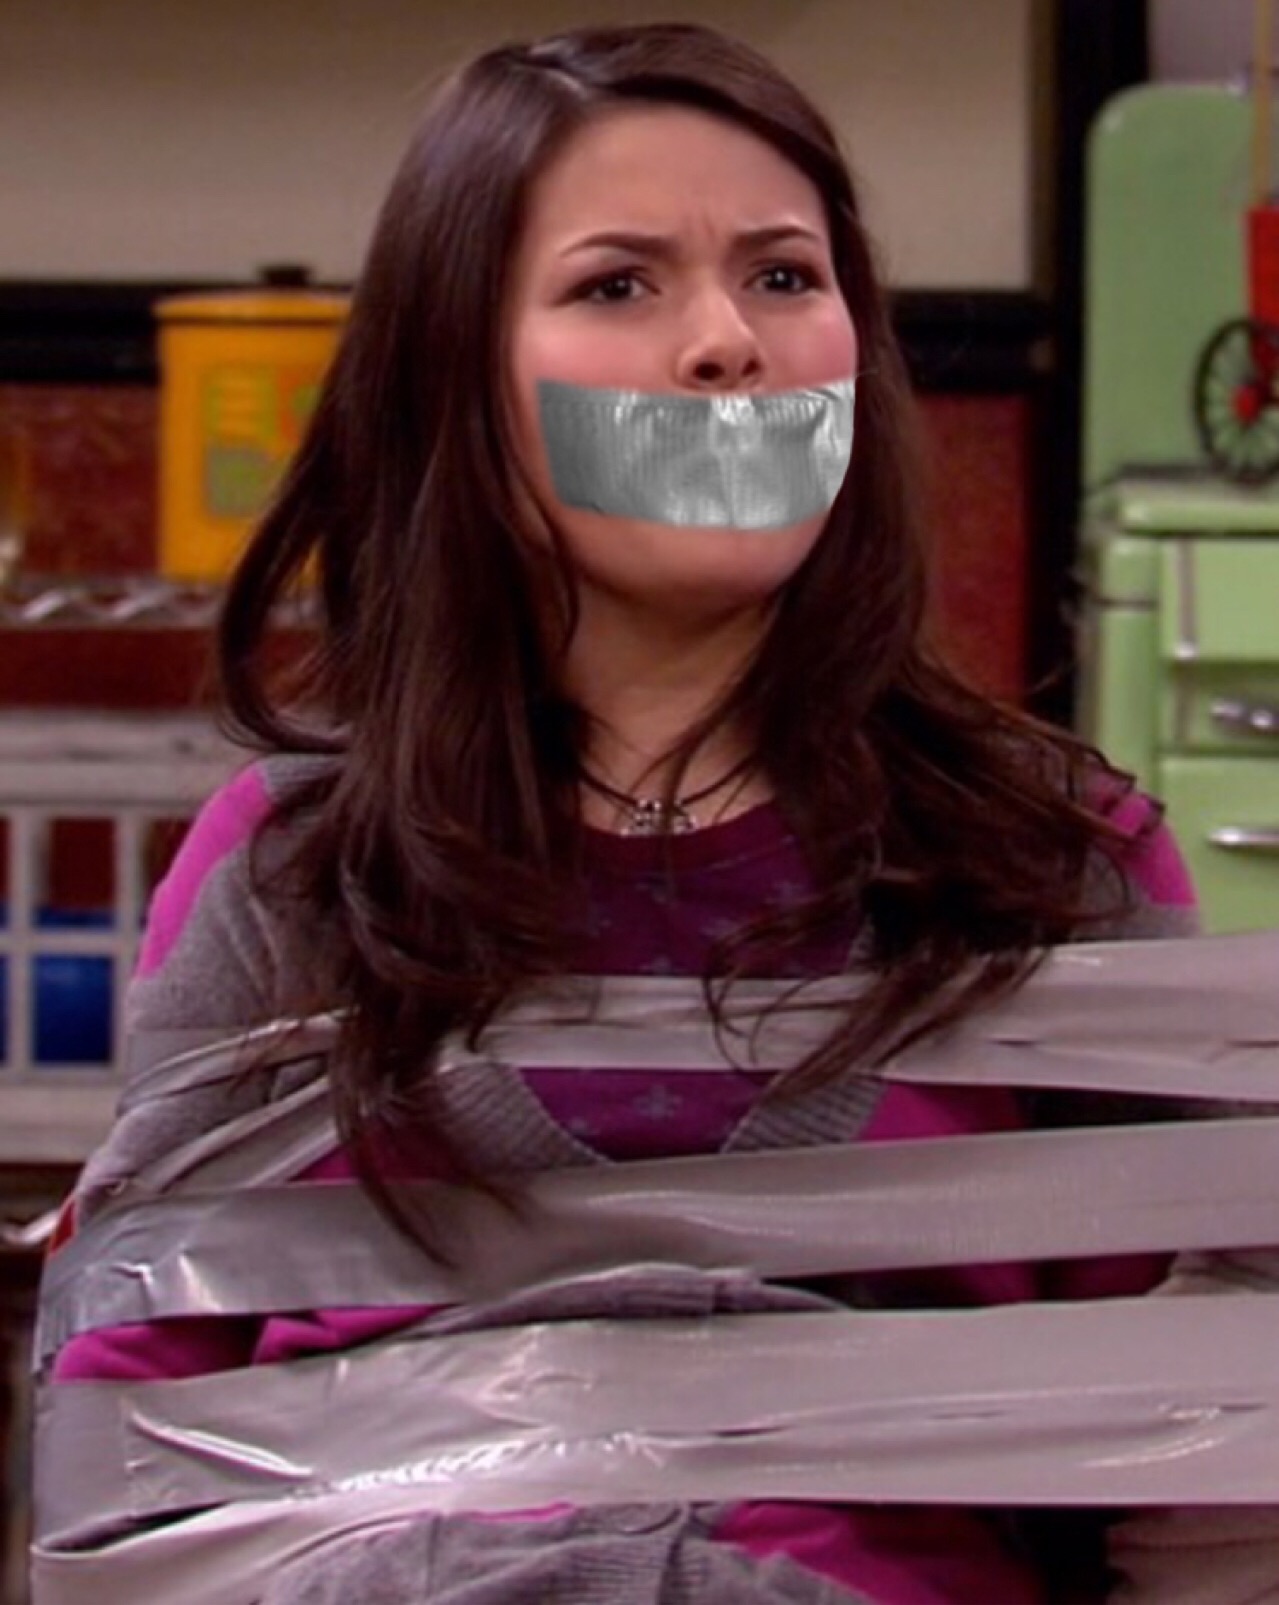 Miranda Cosgrove Taped Up And Gagged 3 By Goldy0123 On DeviantArt.